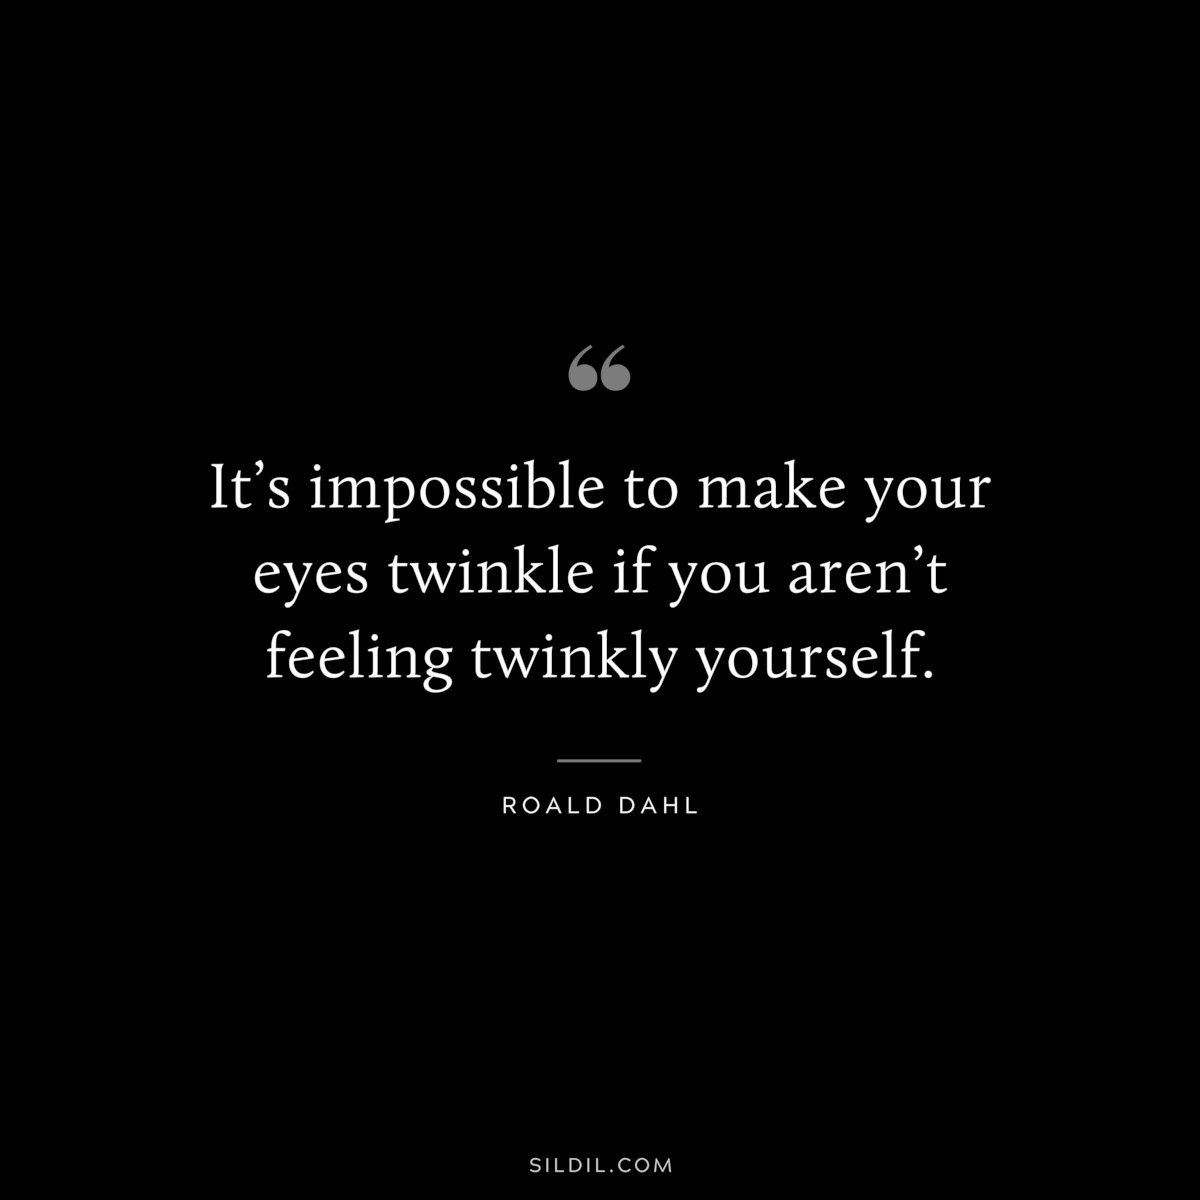 It’s impossible to make your eyes twinkle if you aren’t feeling twinkly yourself. ― Roald Dahl